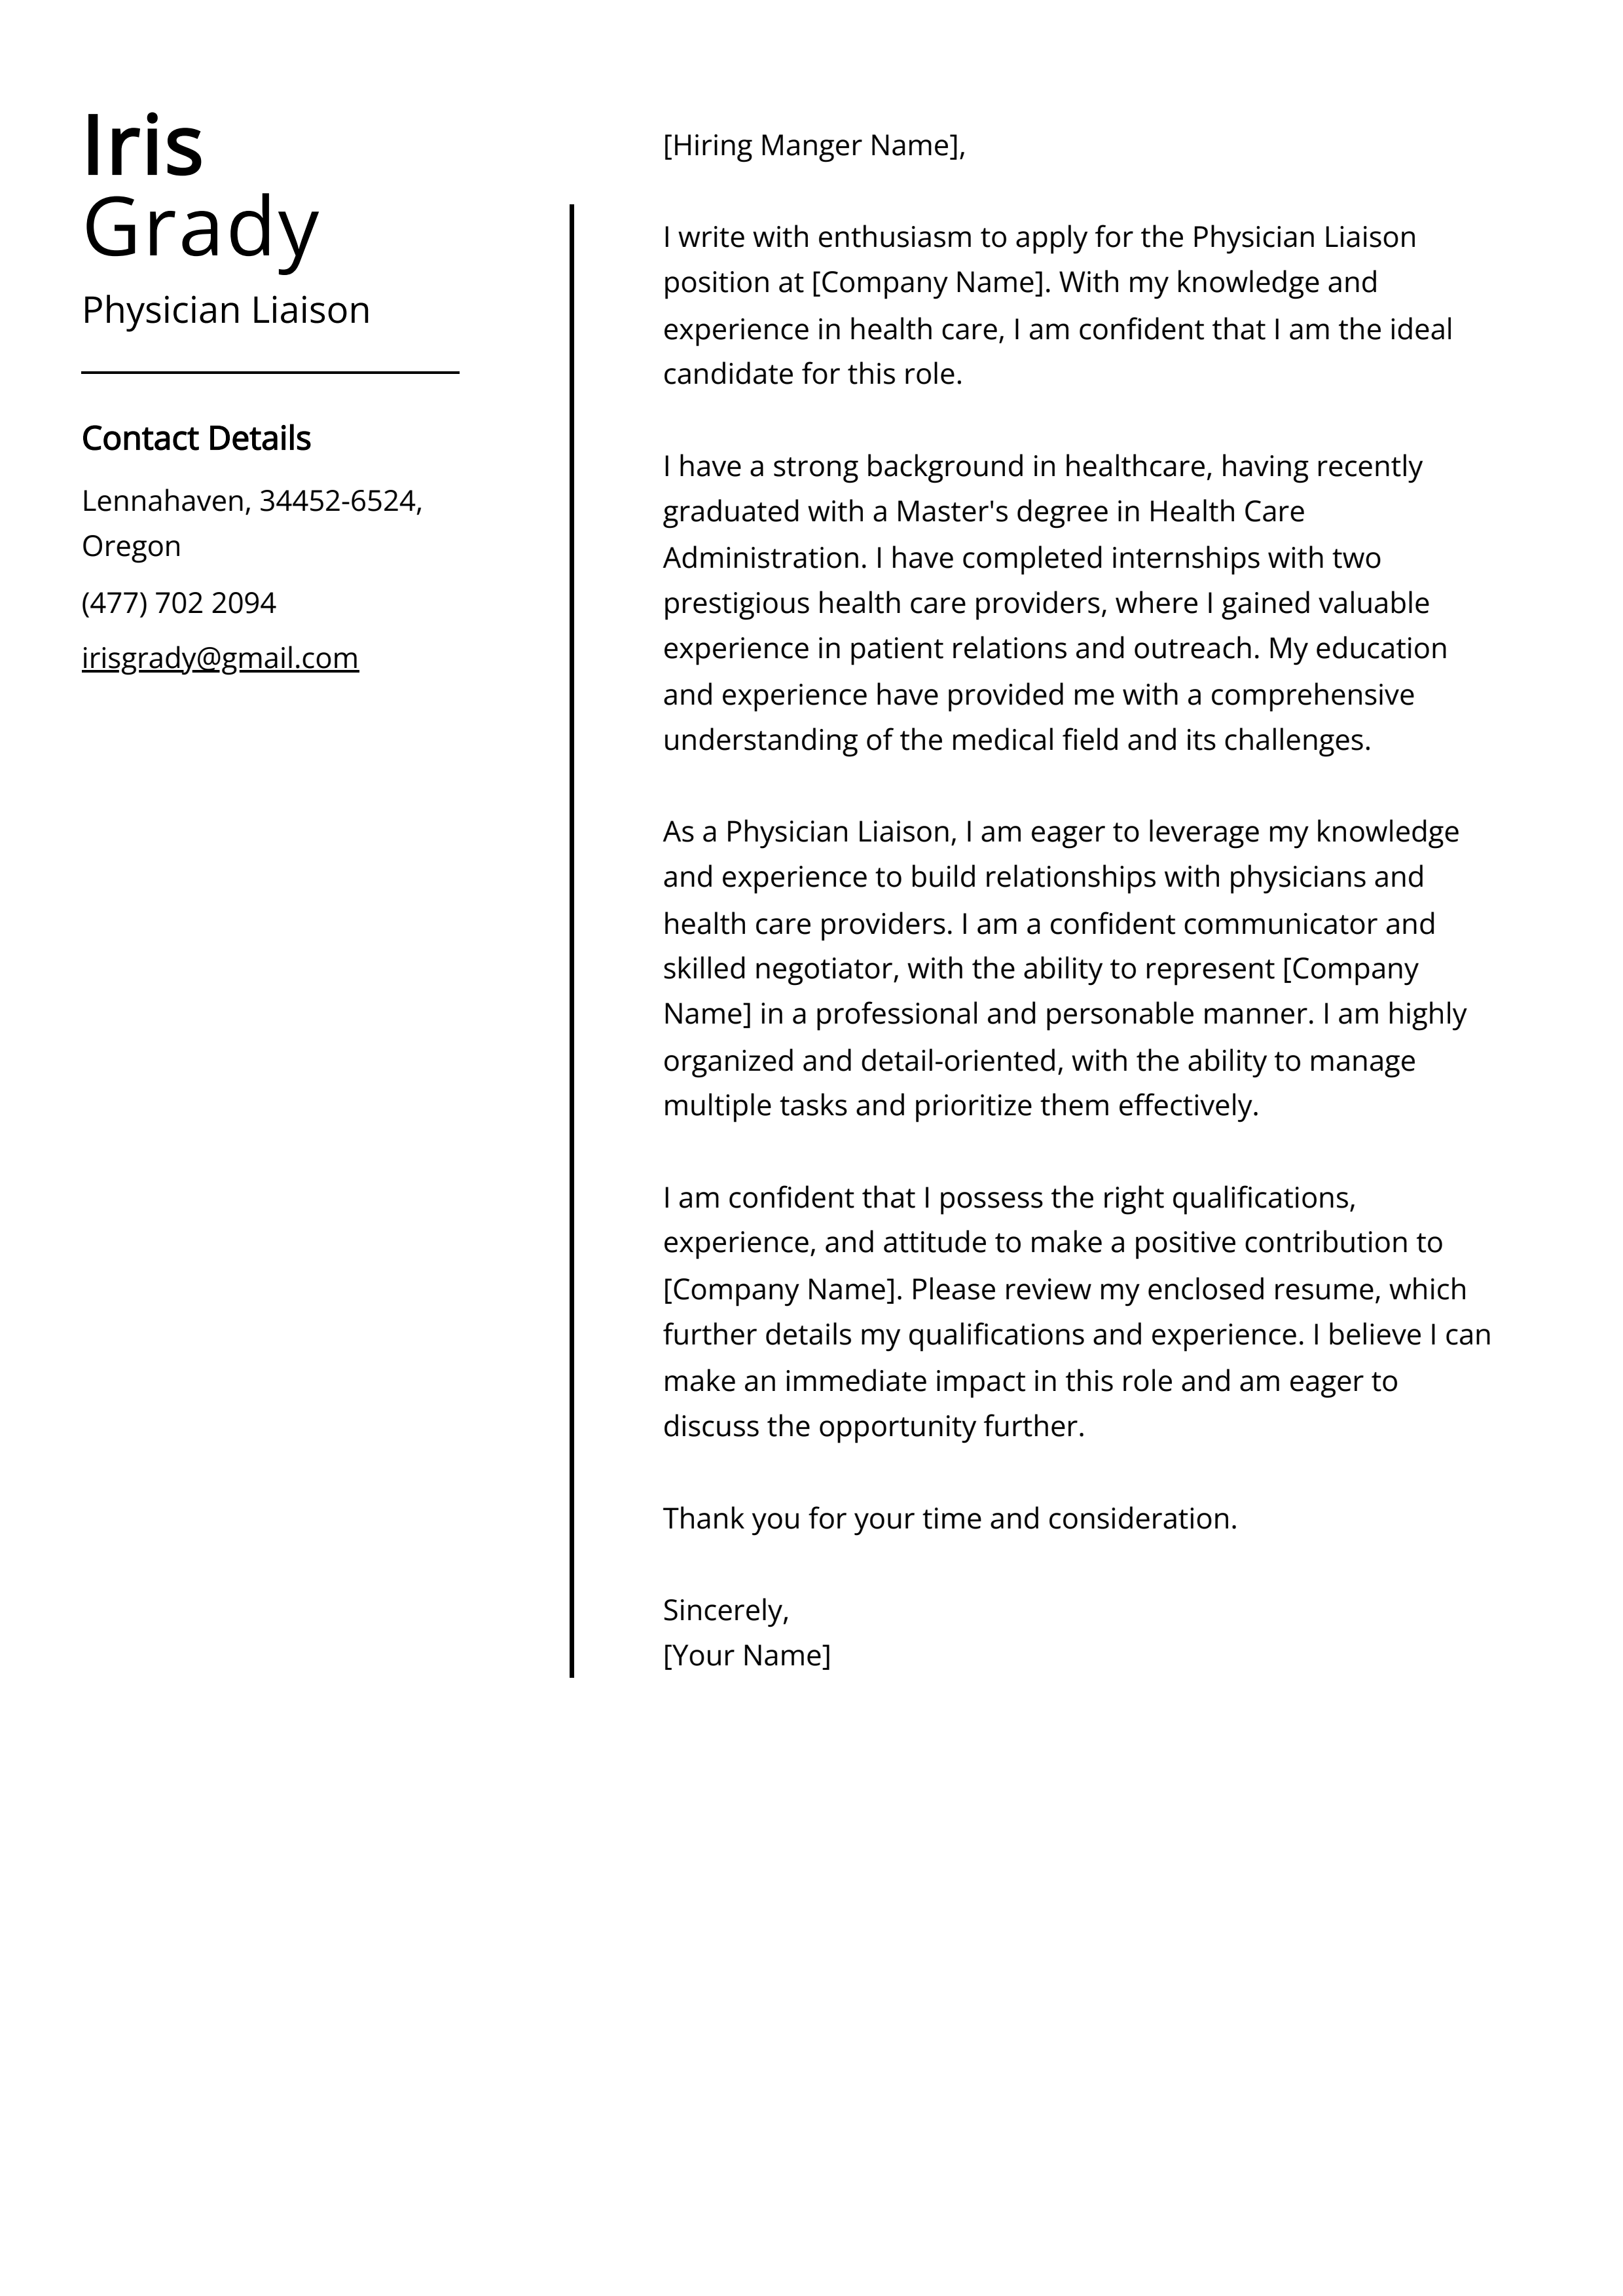 Physician Liaison Cover Letter Example